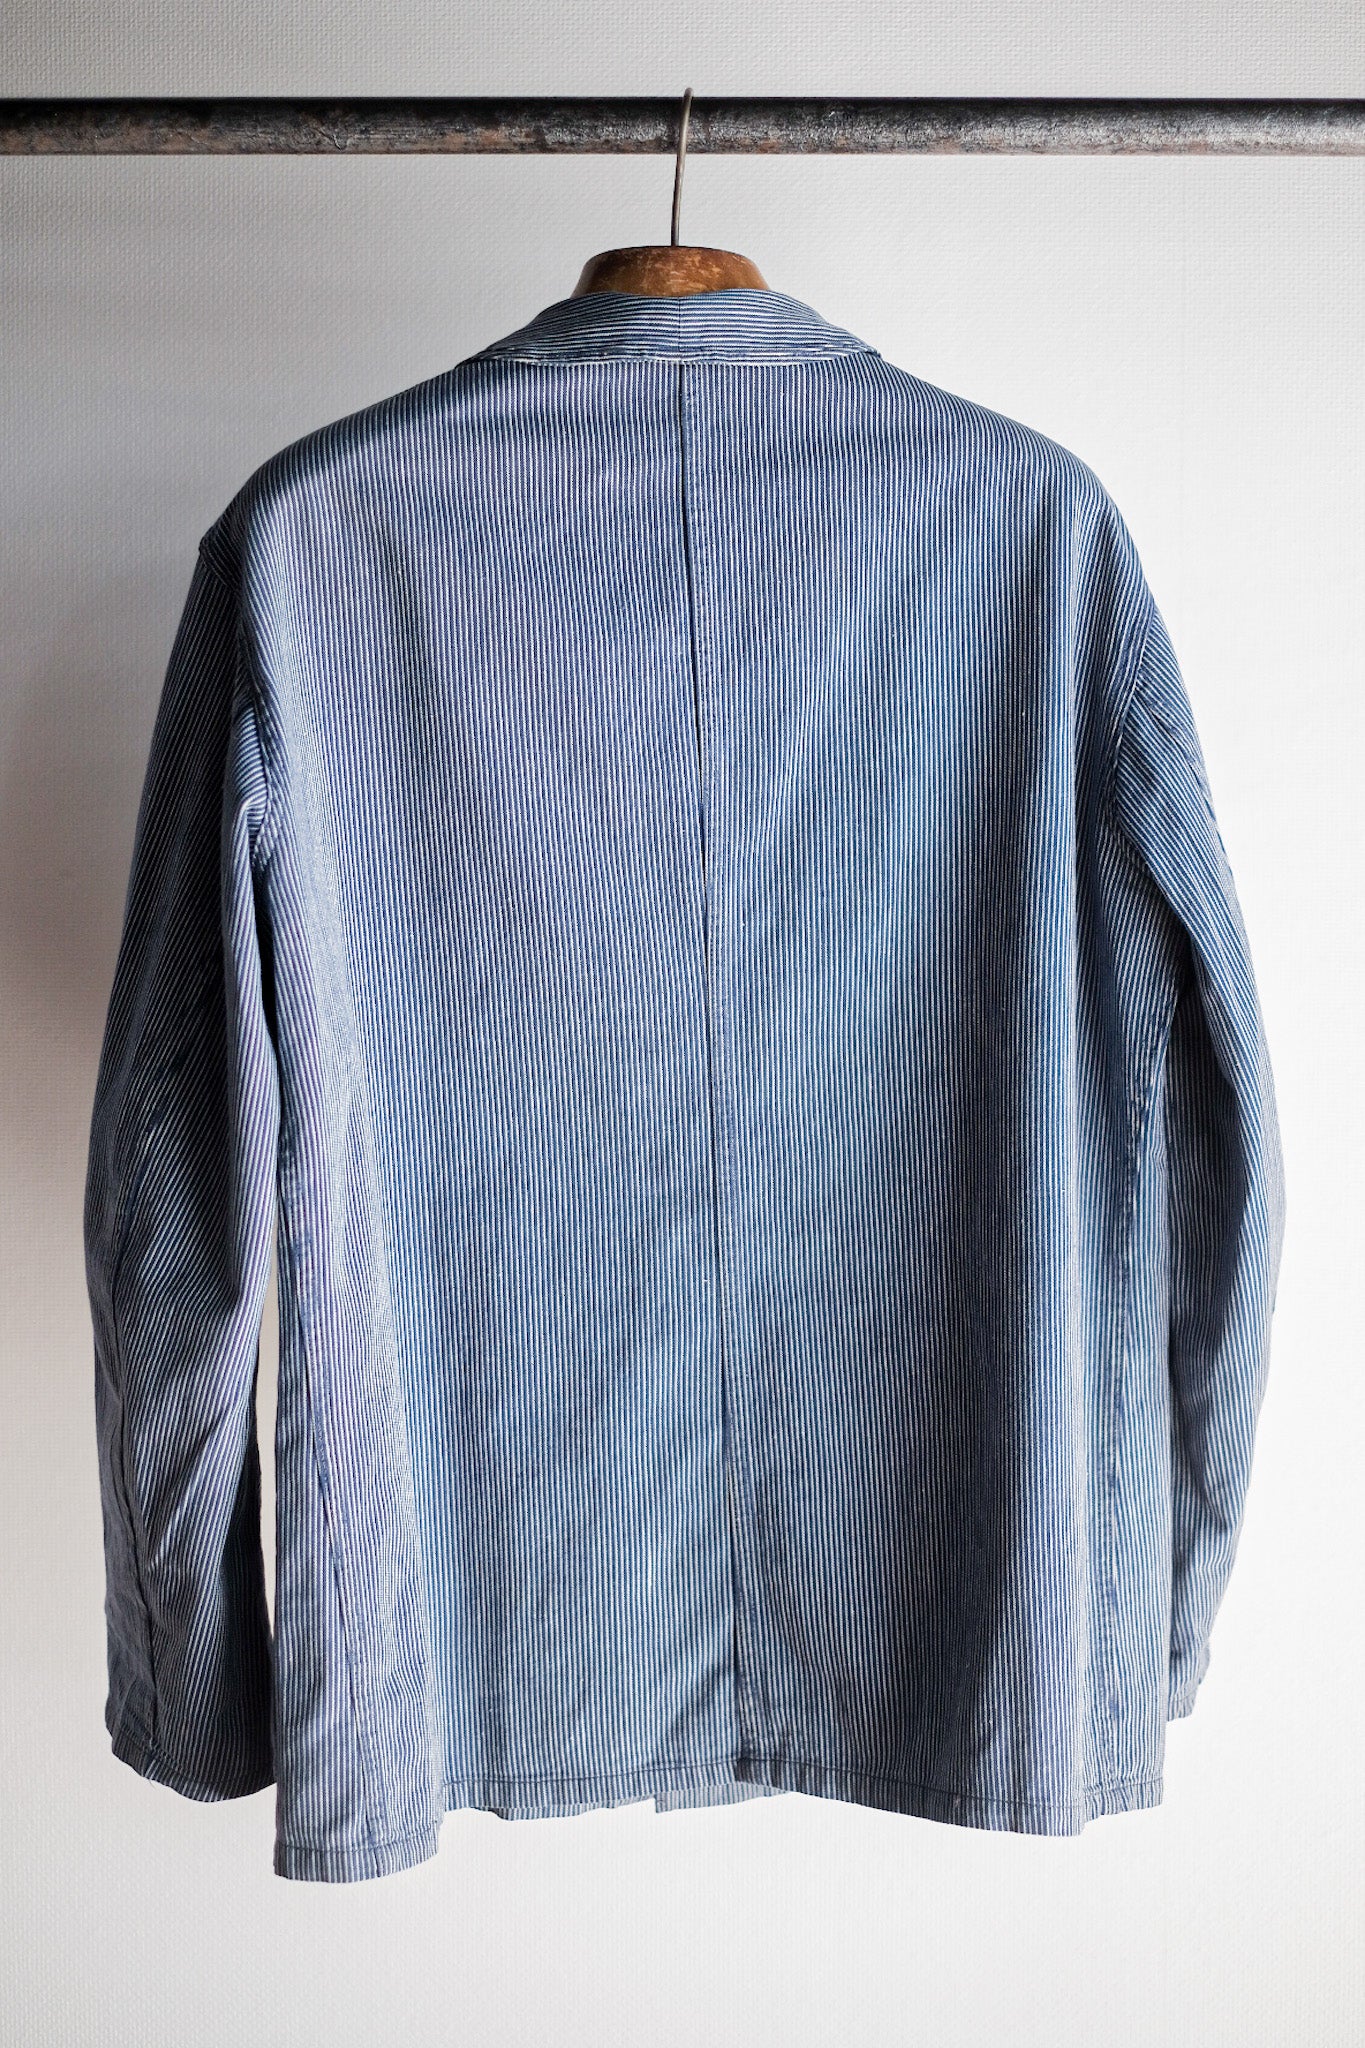 【~50's】French Vintage Cotton Striped Work Jacket "CGT"